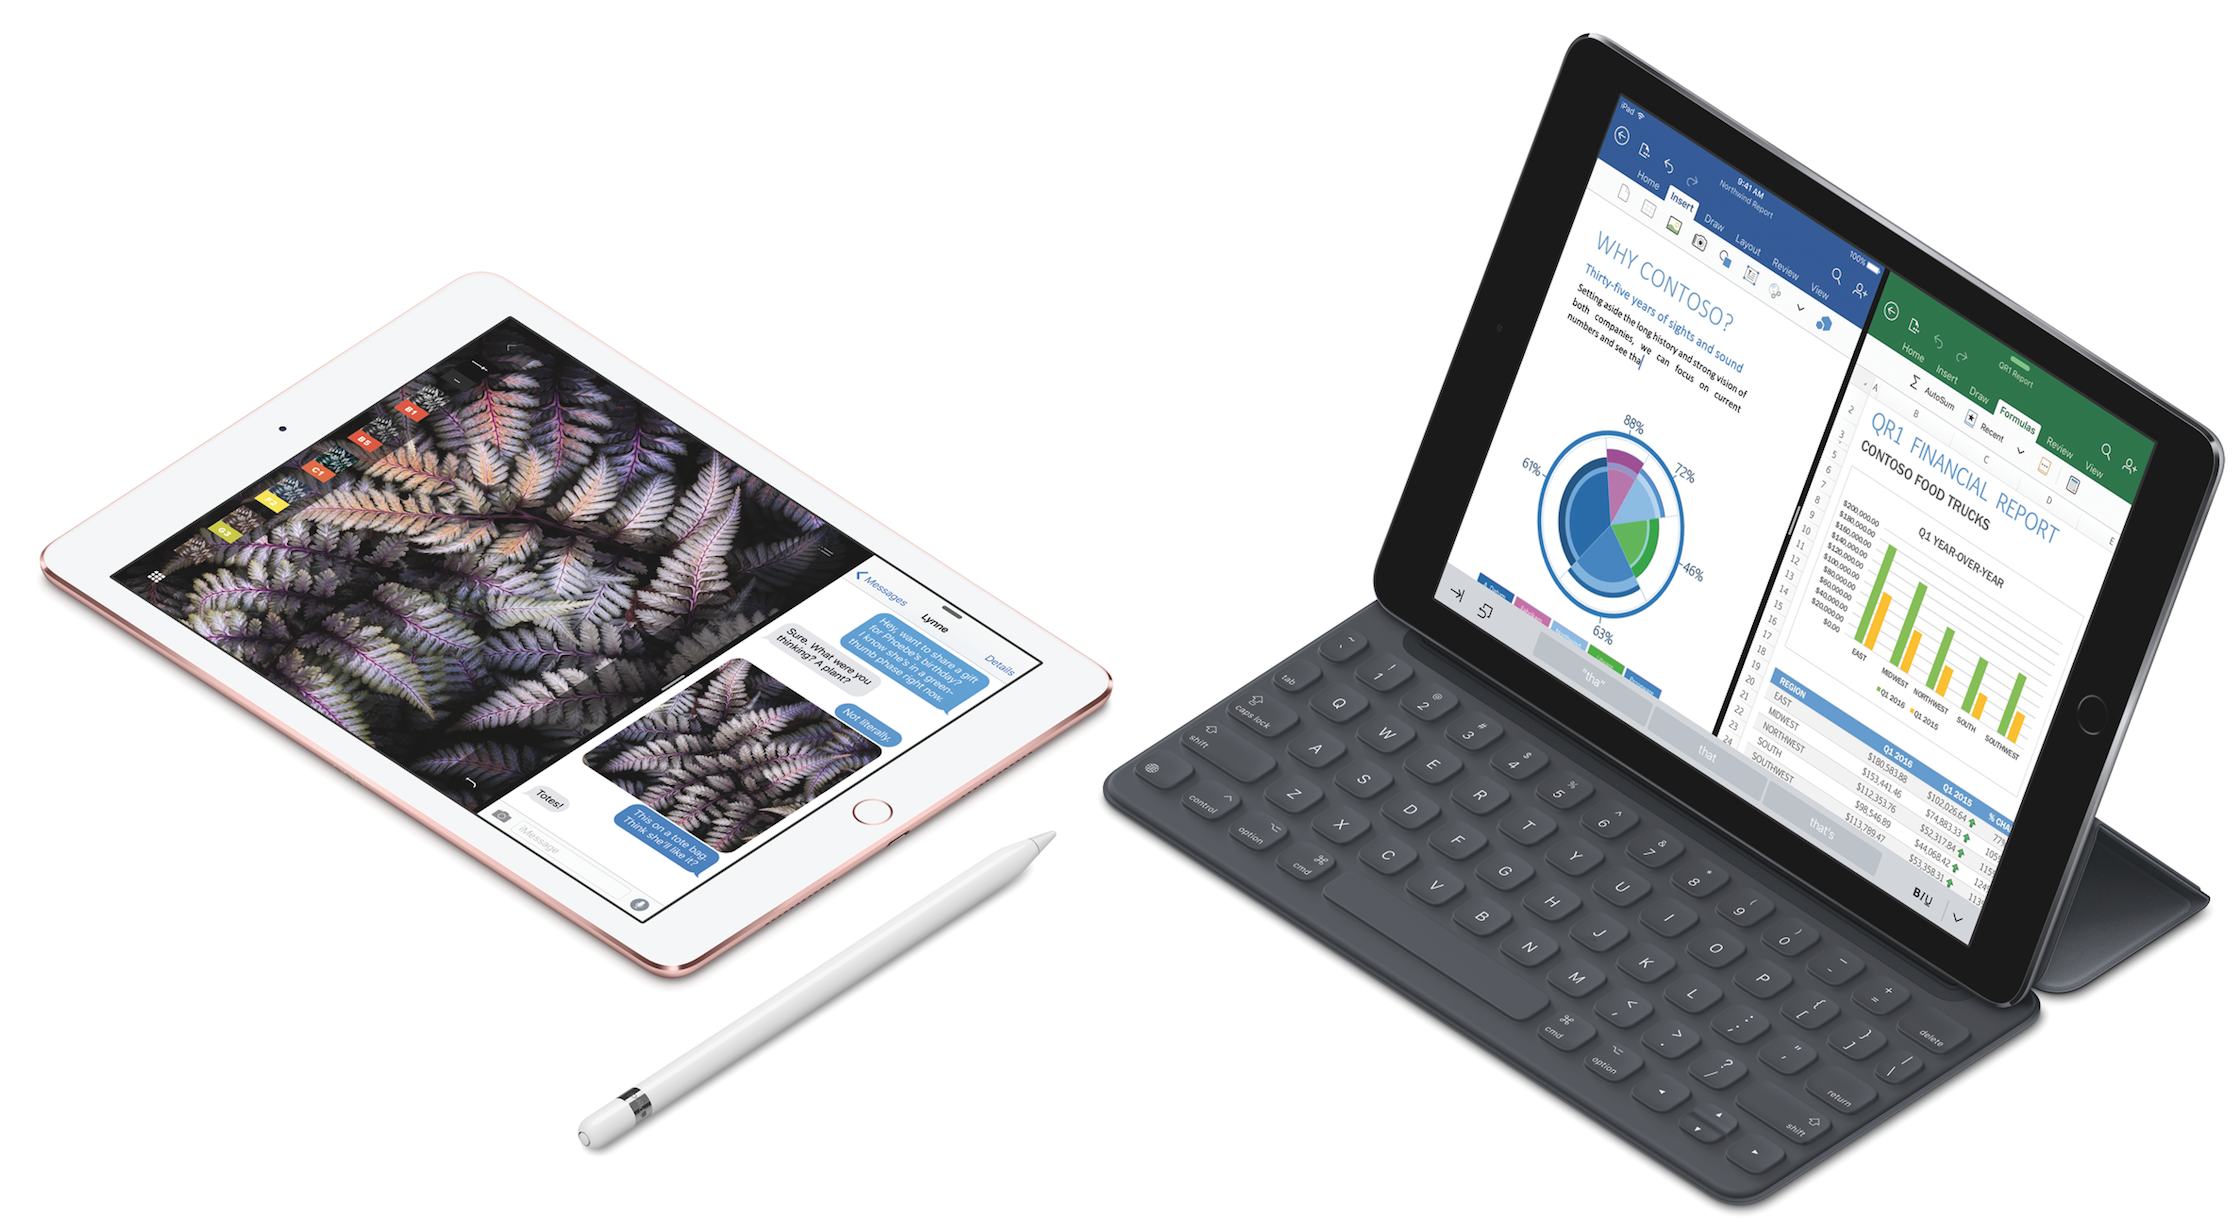 iPad Pro with Smart Keyboard and Apple Pencil